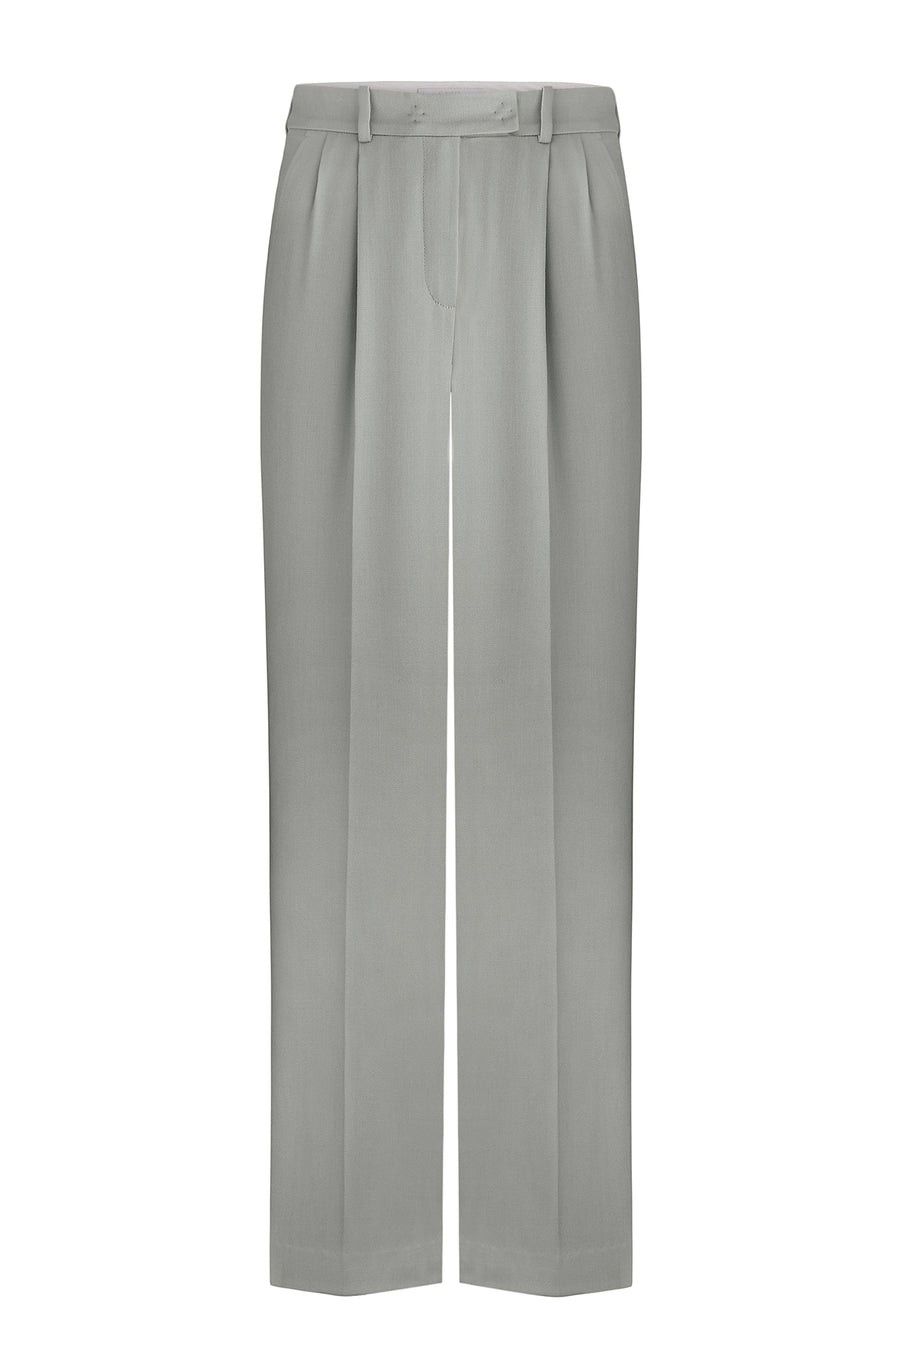 Men's style palazzo trousers